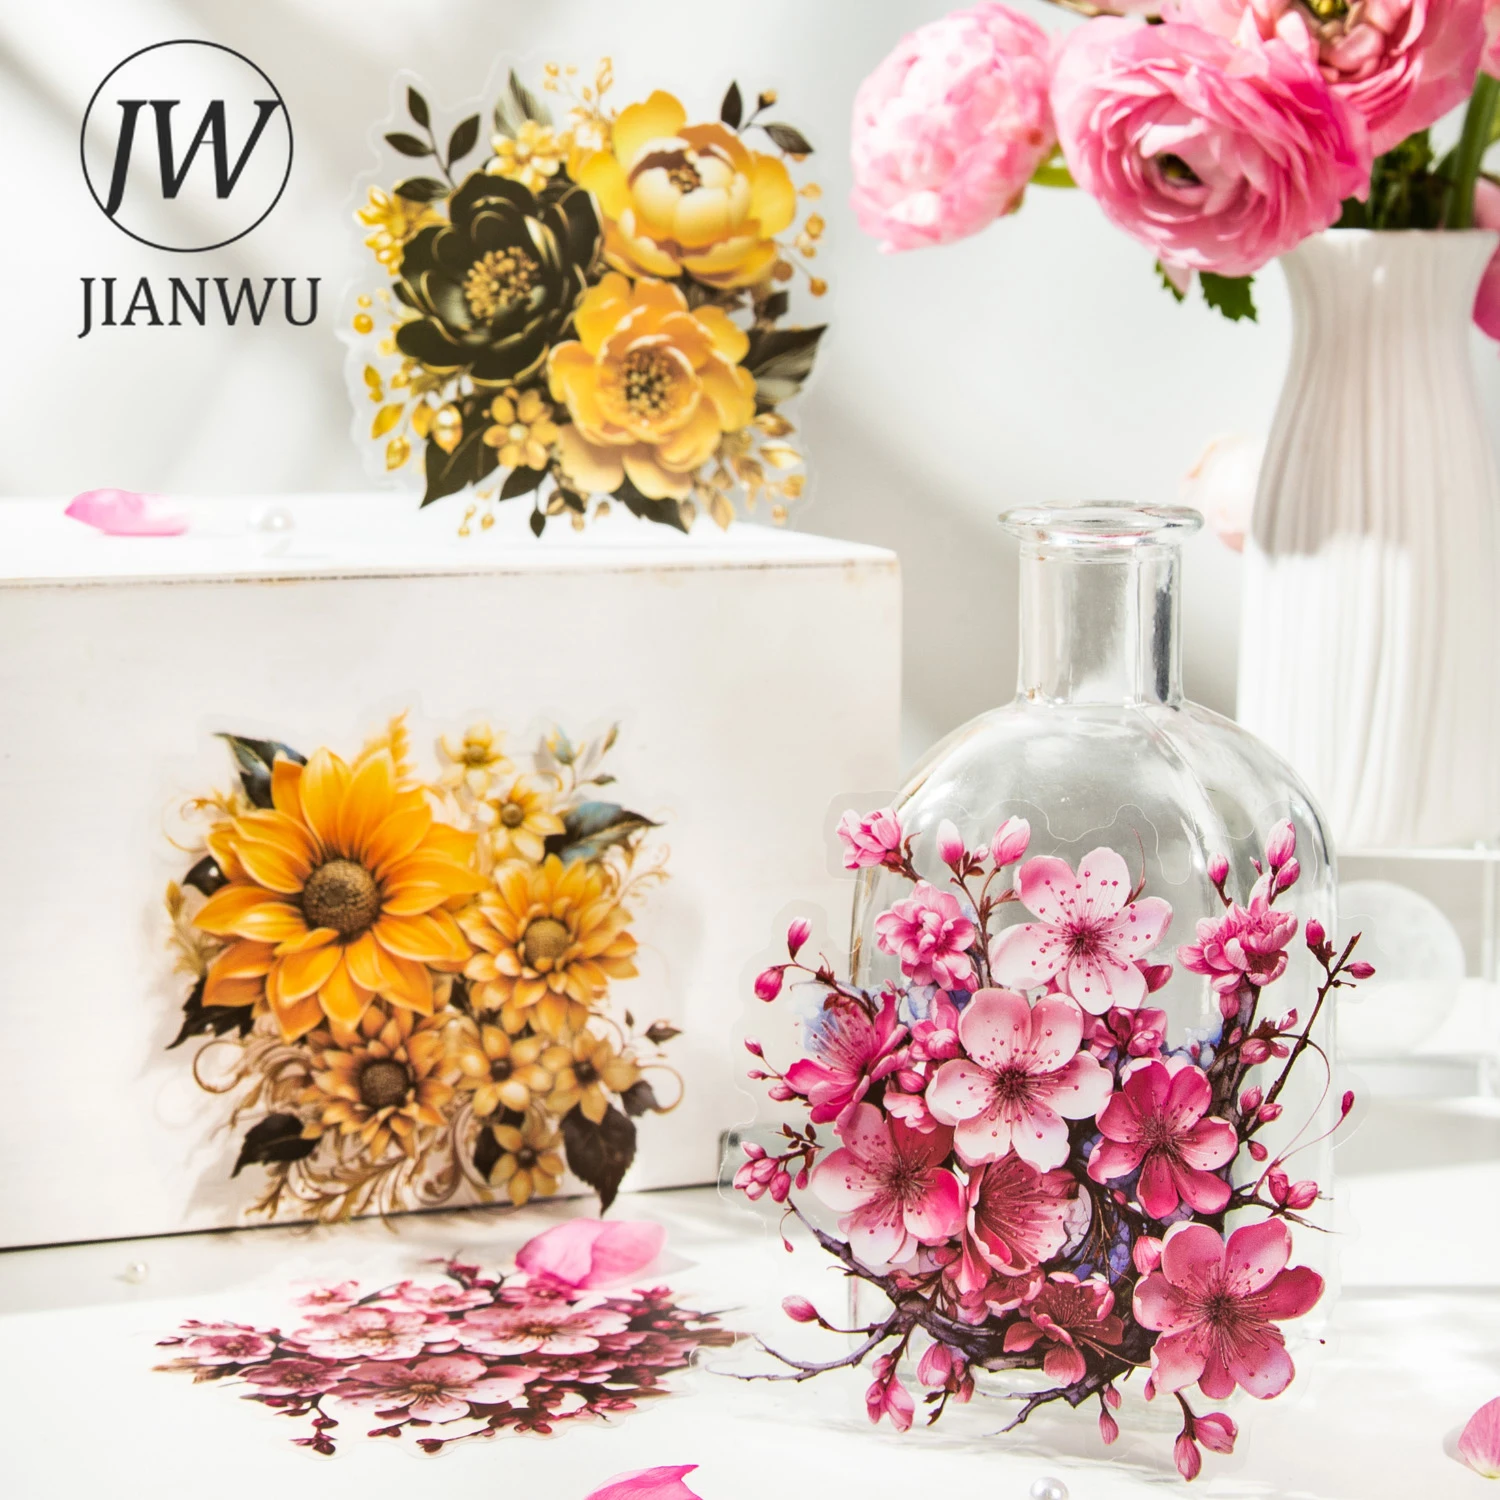 

JIANWU 10 Sheets Flower Hunting Collection Series Vintage Material Decor PET Sticker Creative DIY Journal Collage Stationery